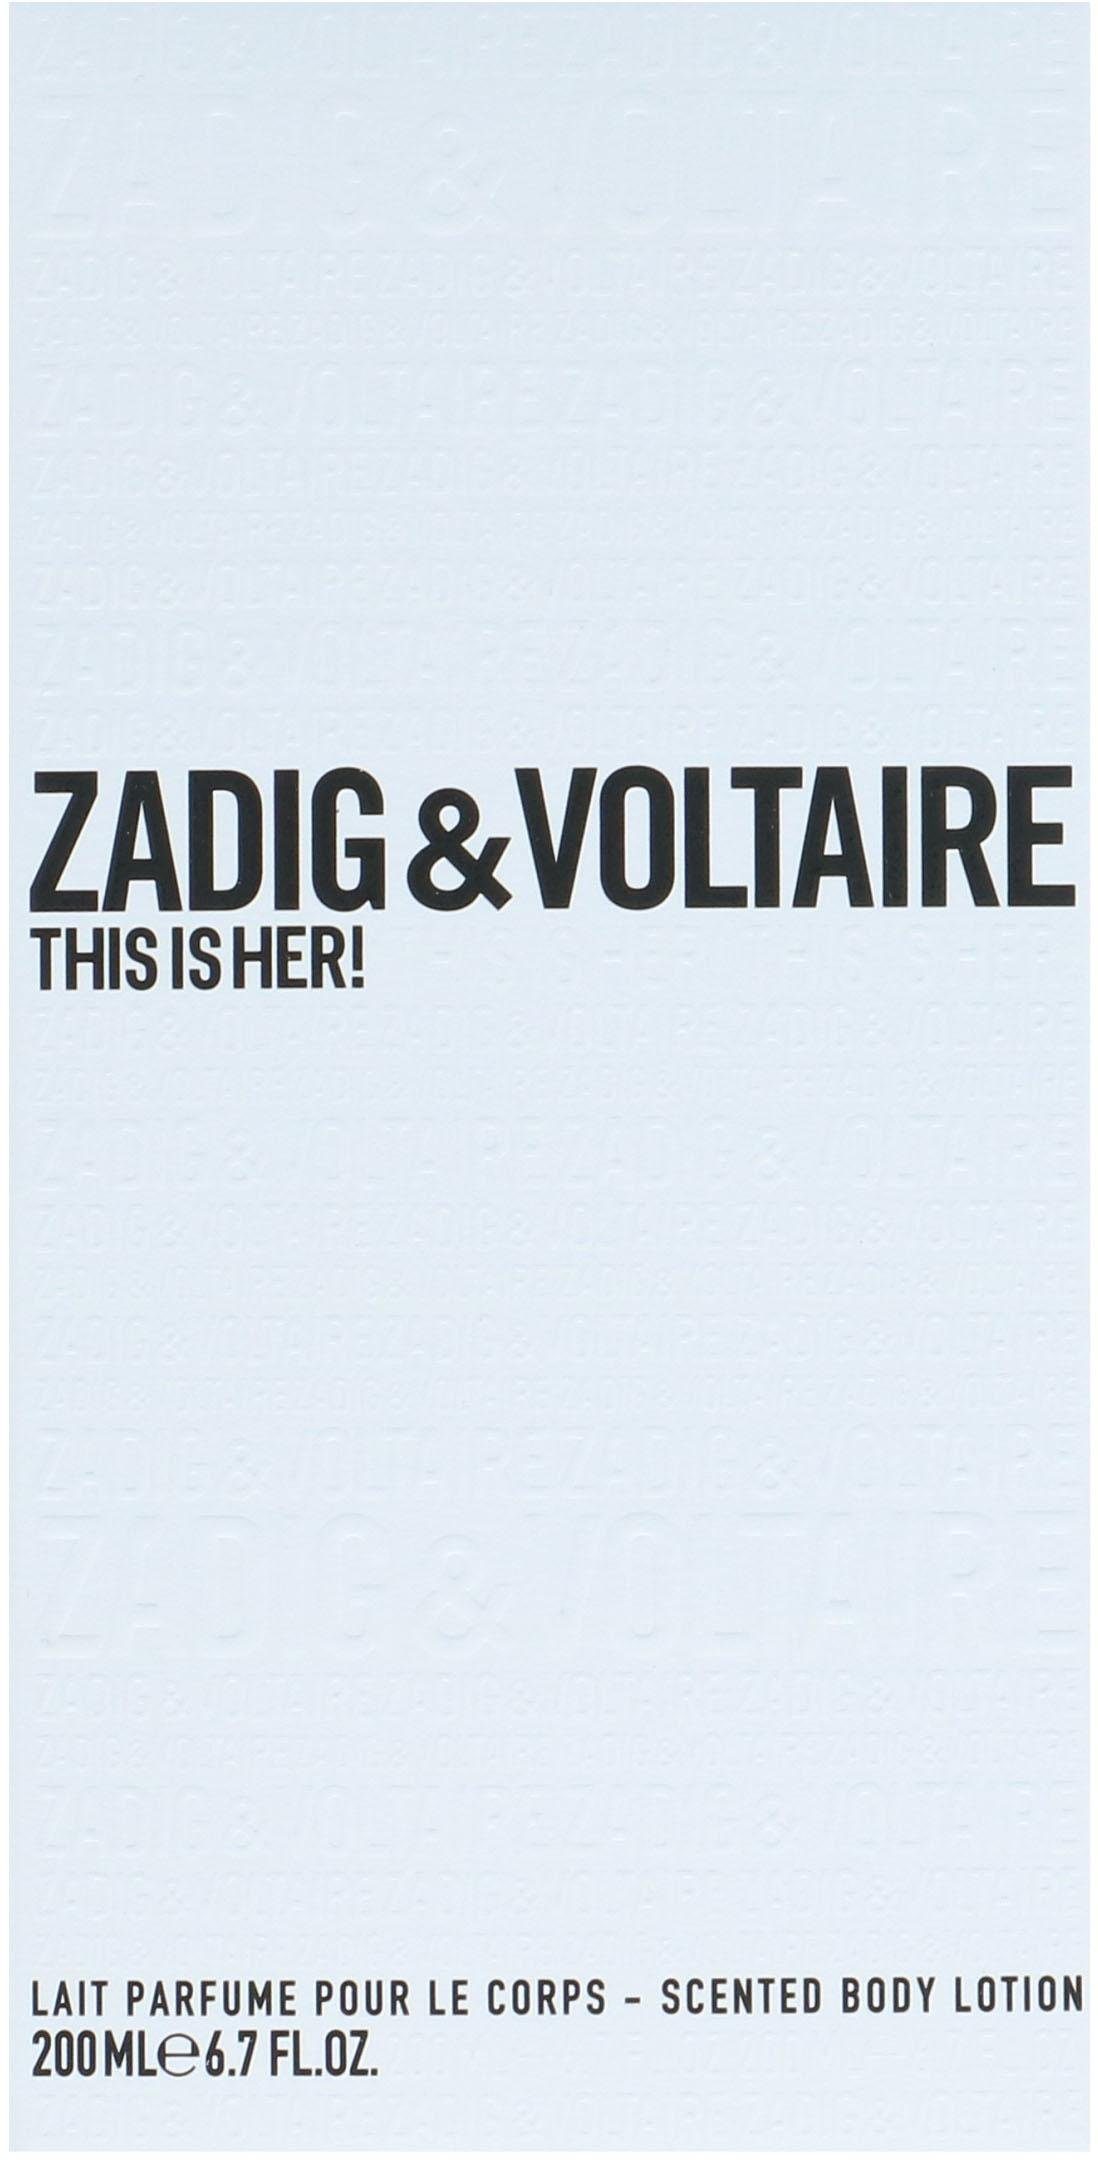 VOLTAIRE & Her! is Bodylotion ZADIG This